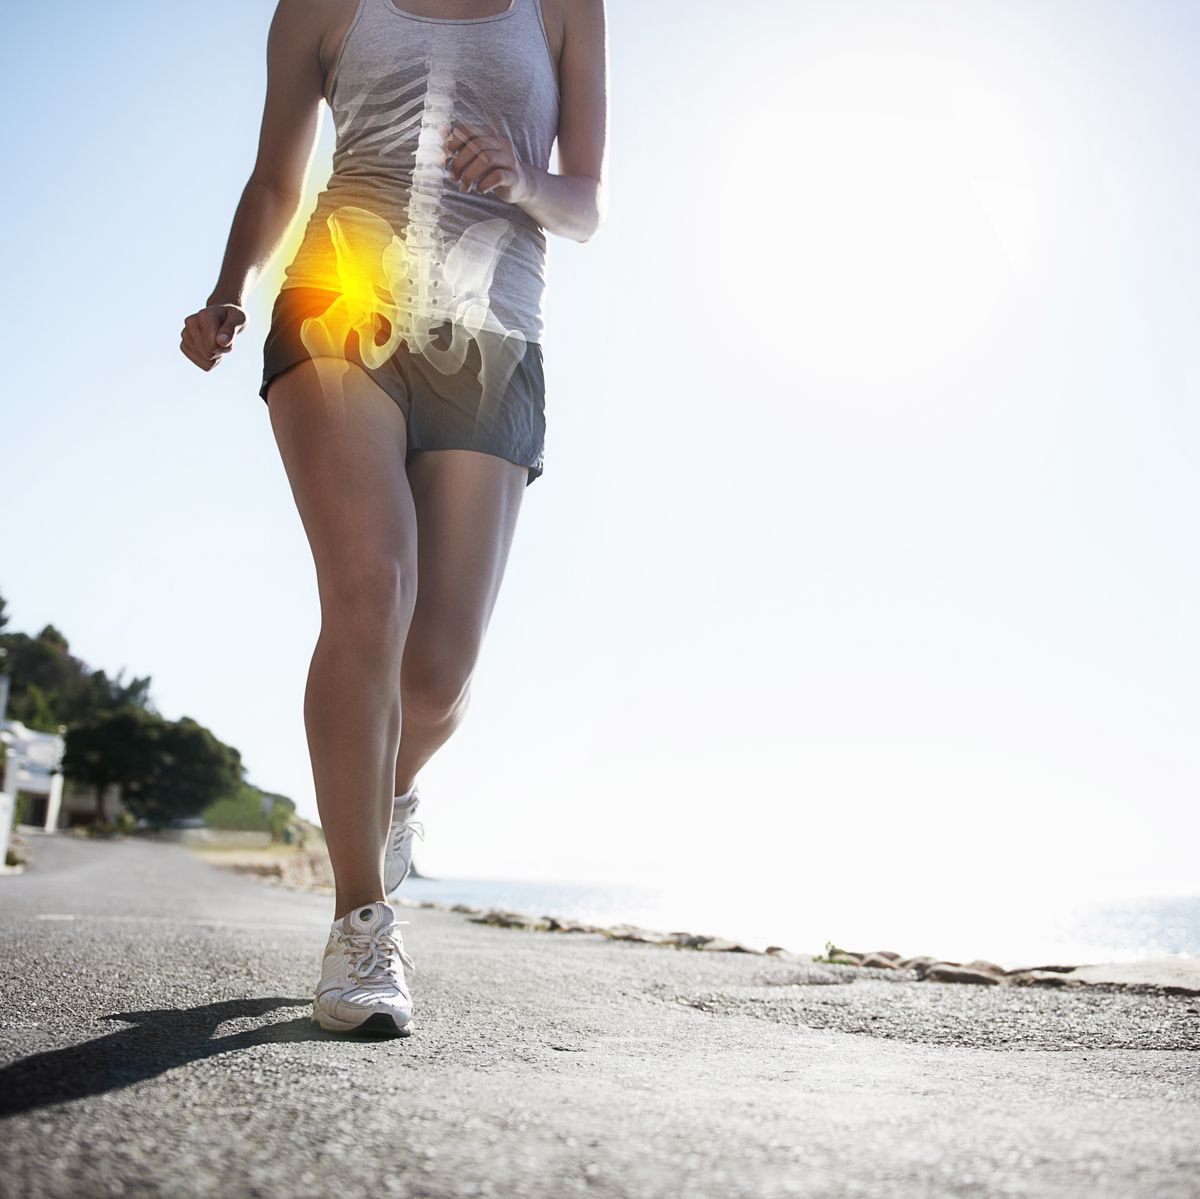 Navigate Hip Pain as You Spring into Outdoor Activities